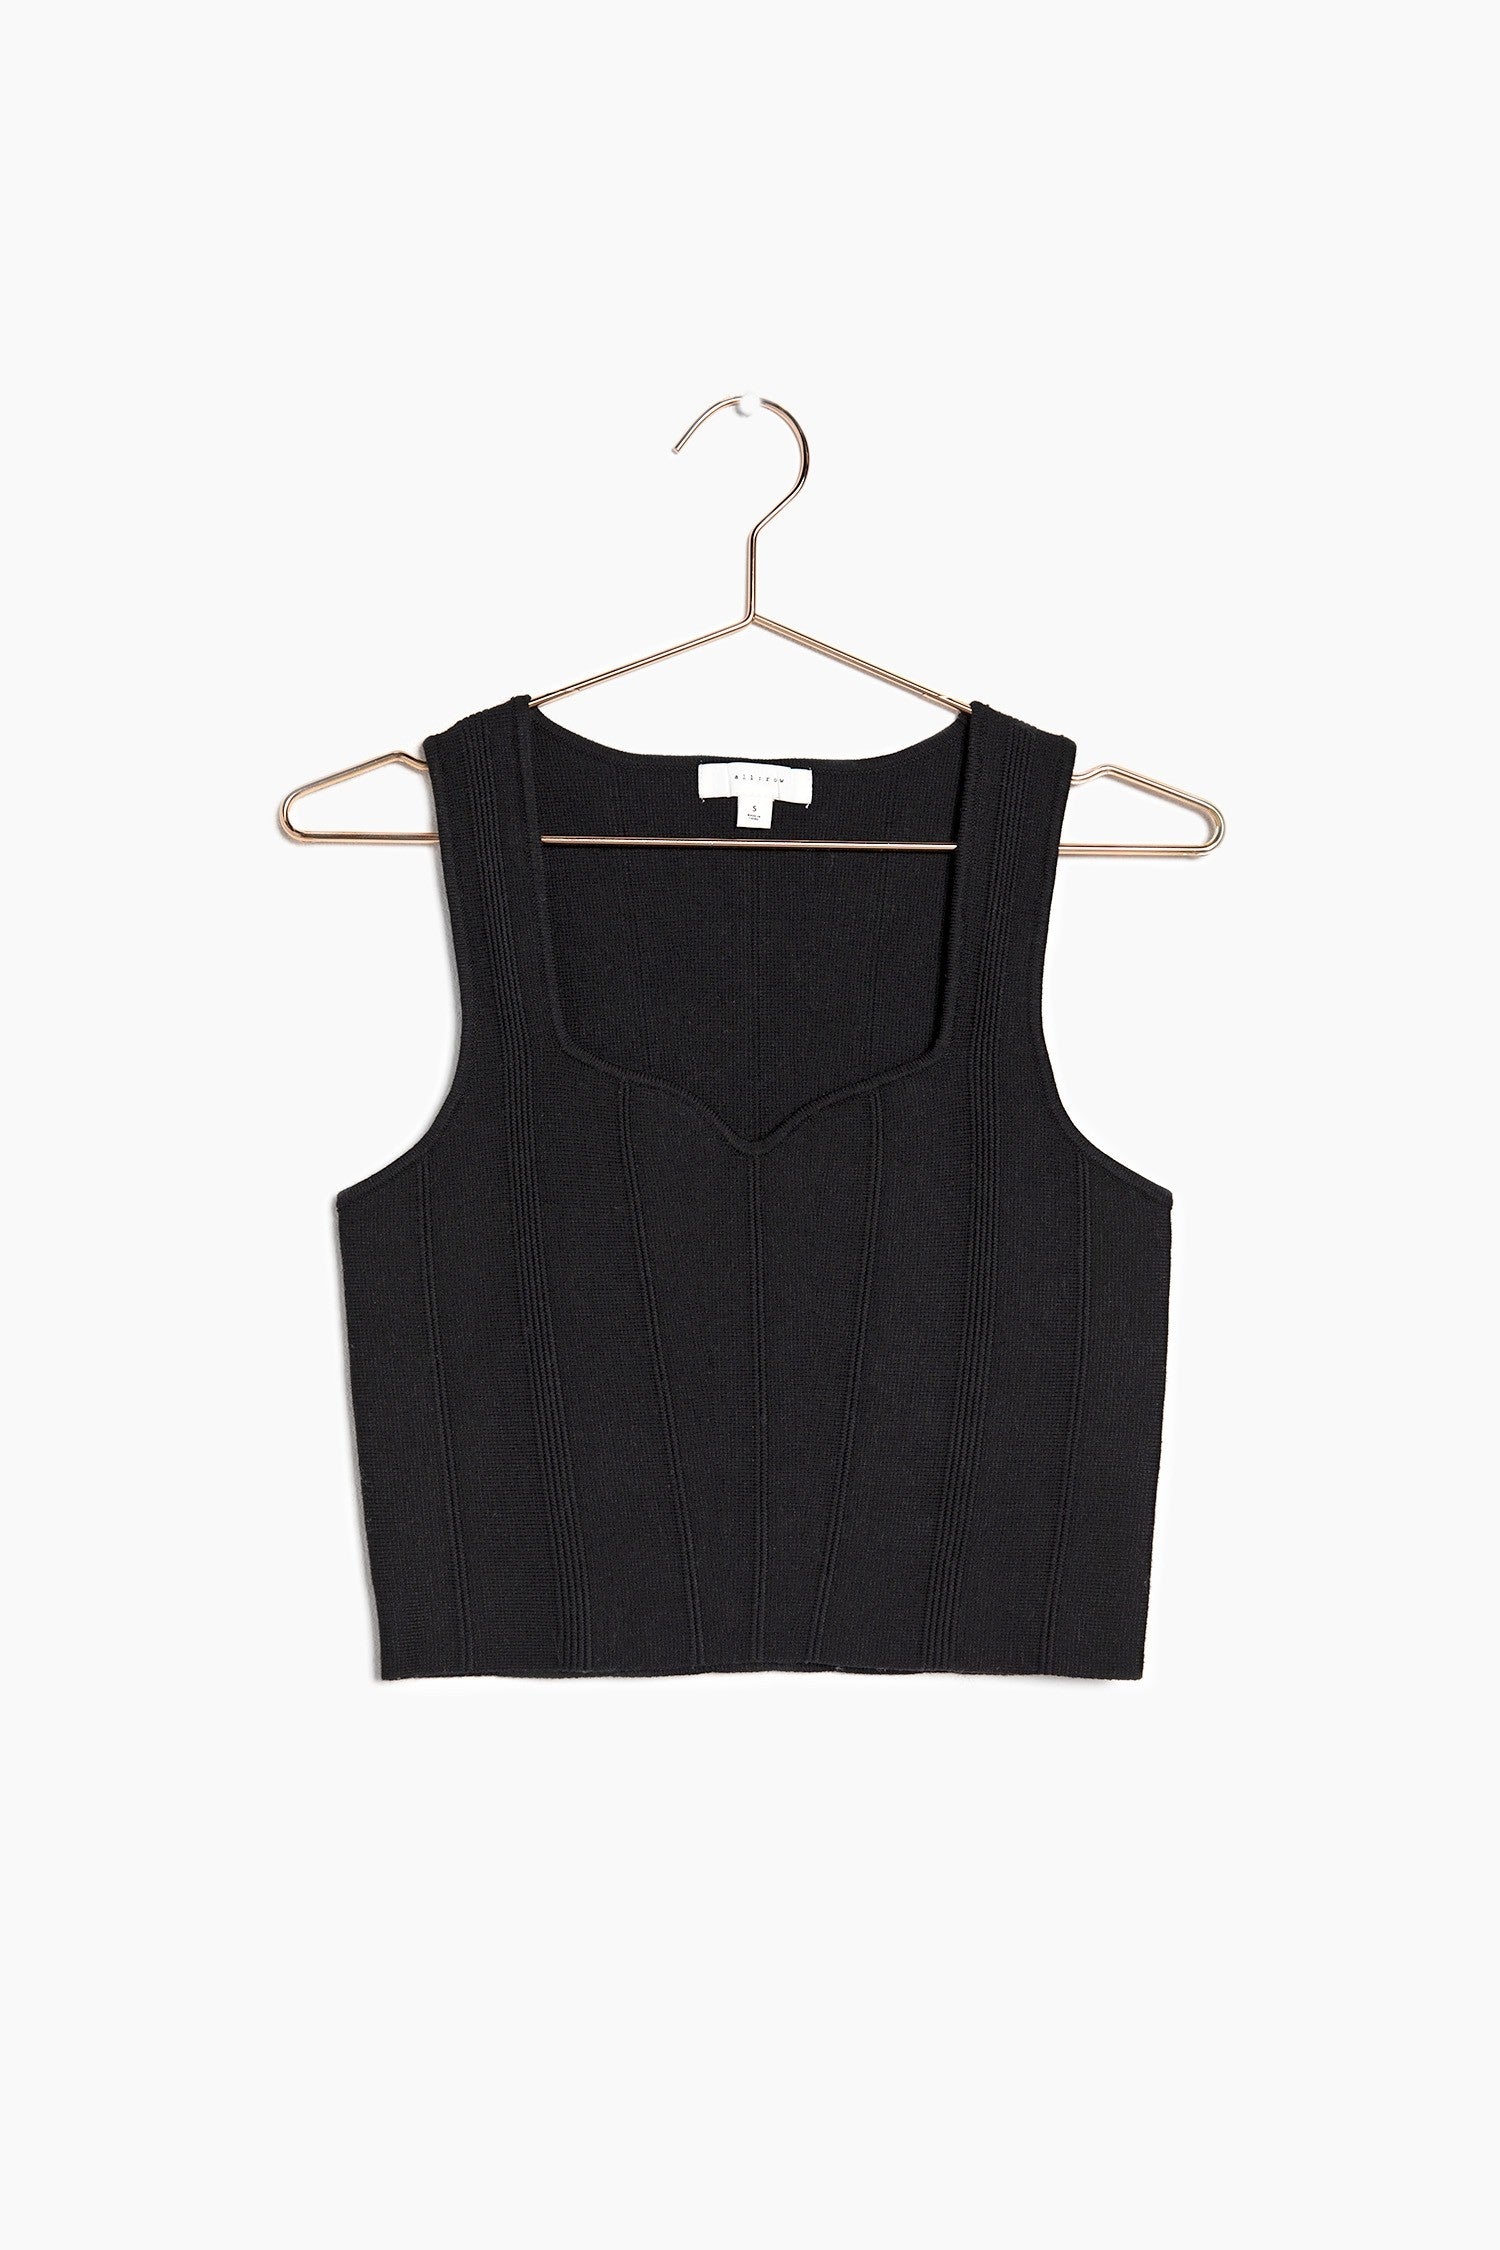 Front of the knit top on a hanger showcasing the beautiful sweetheart neckline